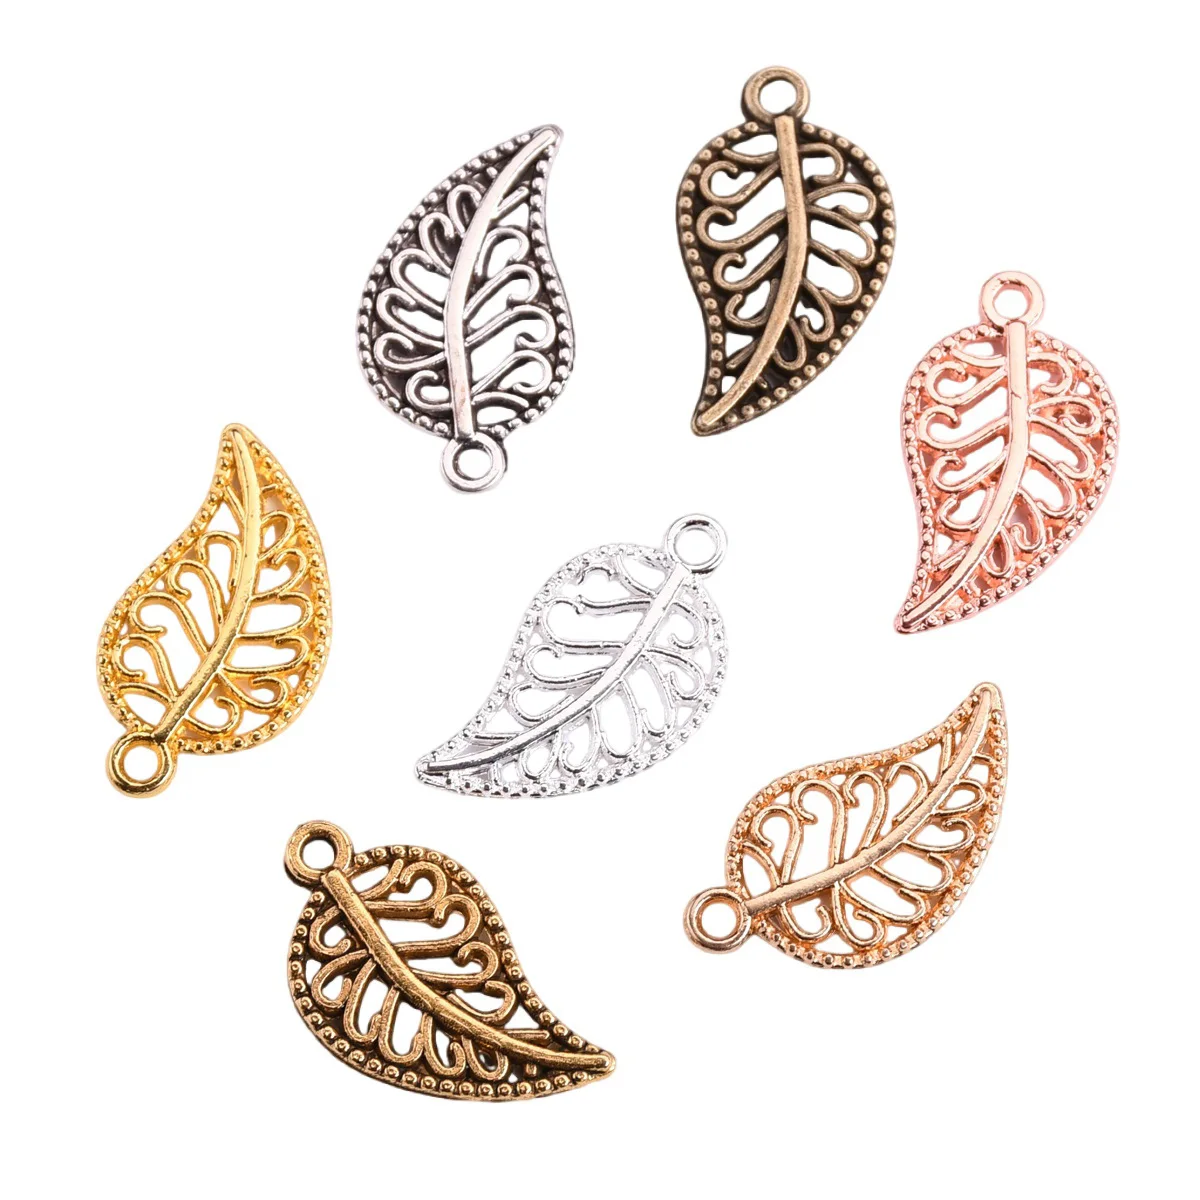 20pcs 19x10mm Leaf Shape Gold/Silver Color Alloy Metal Loose Beads Pendants For Jewelry Making DIY Findings bracelet halloween skull hollow out alloy bracelet in gold silver size one size